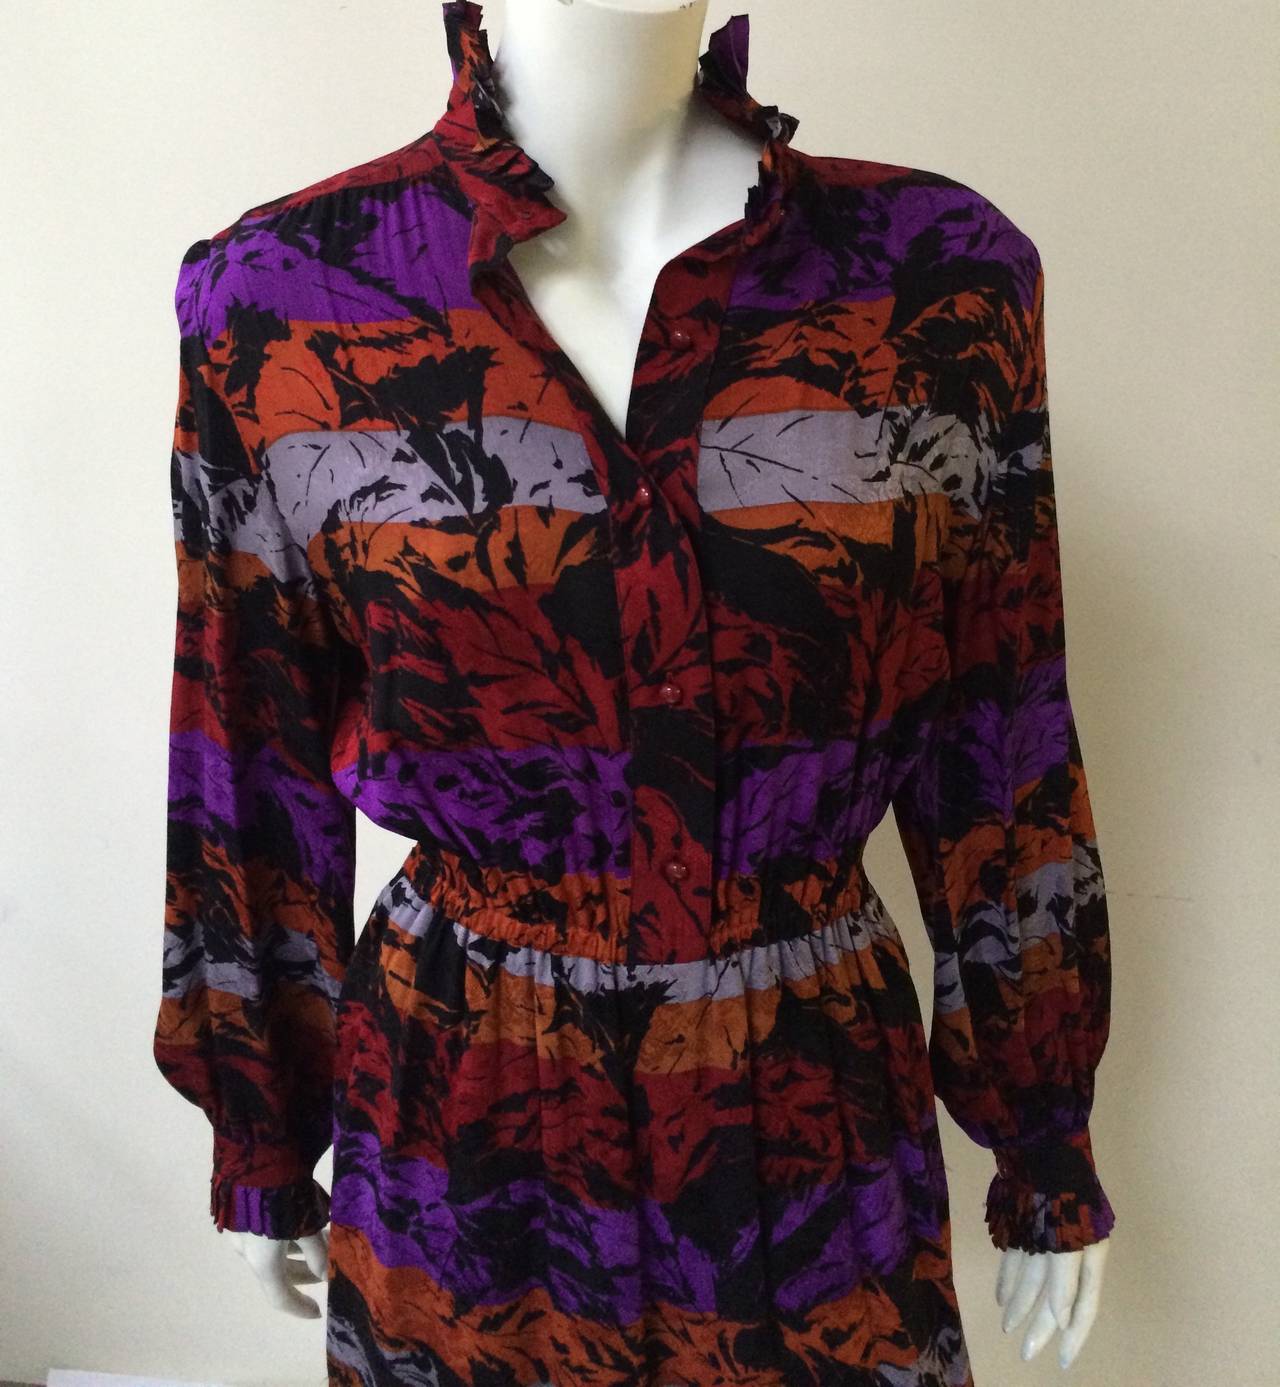 Nina Ricci Boutique Paris 70s silk dress made in France.  Abstract leaf print, ruffled collar & sleeves with elastic waistband makes this Nina Ricci a show stopper. Mild shoulder pads. Nina Ricci was born in Italy and moved to France where she